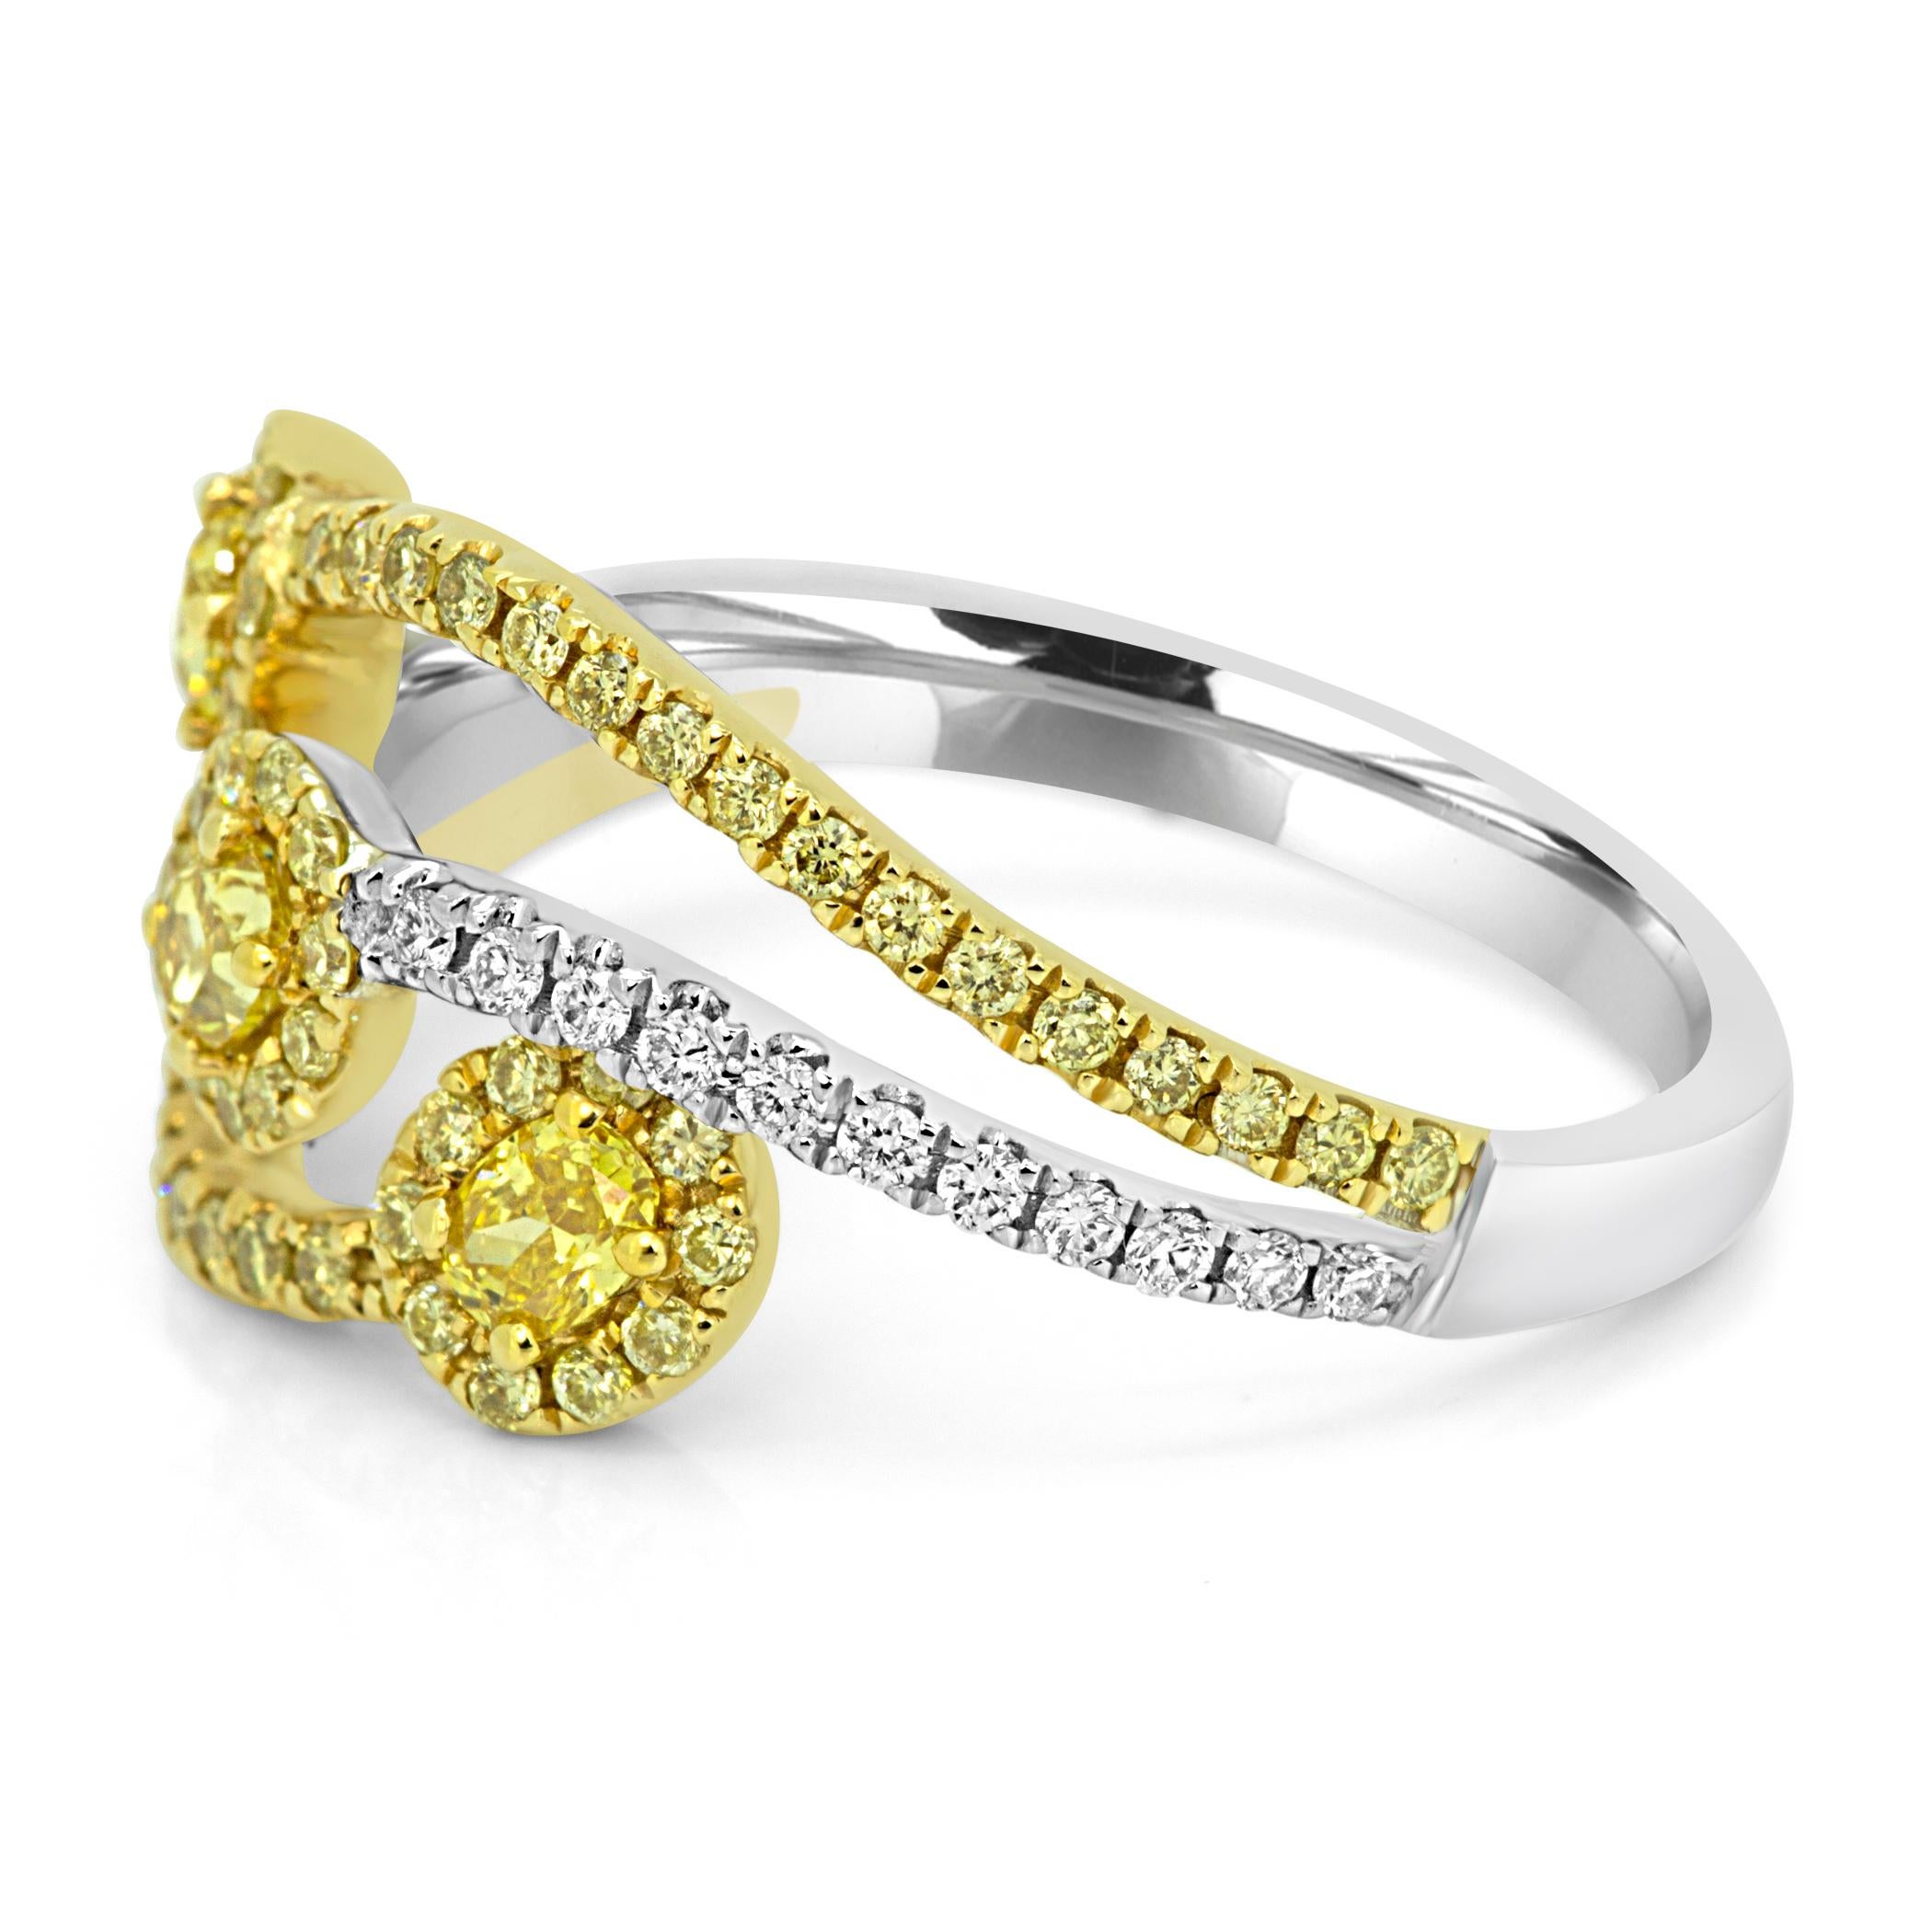 3 Natural Fancy Vivid Yellow Oval Diamond 0.32 Carat Encircled in single Halo of Natural Fancy Yellow Round Diamond 0.32 Carat and Natural White Diamond on the Sides 0.13 Carat in 14K White and Yellow Gold Stunning Fashion Cocktail Ring.

Total